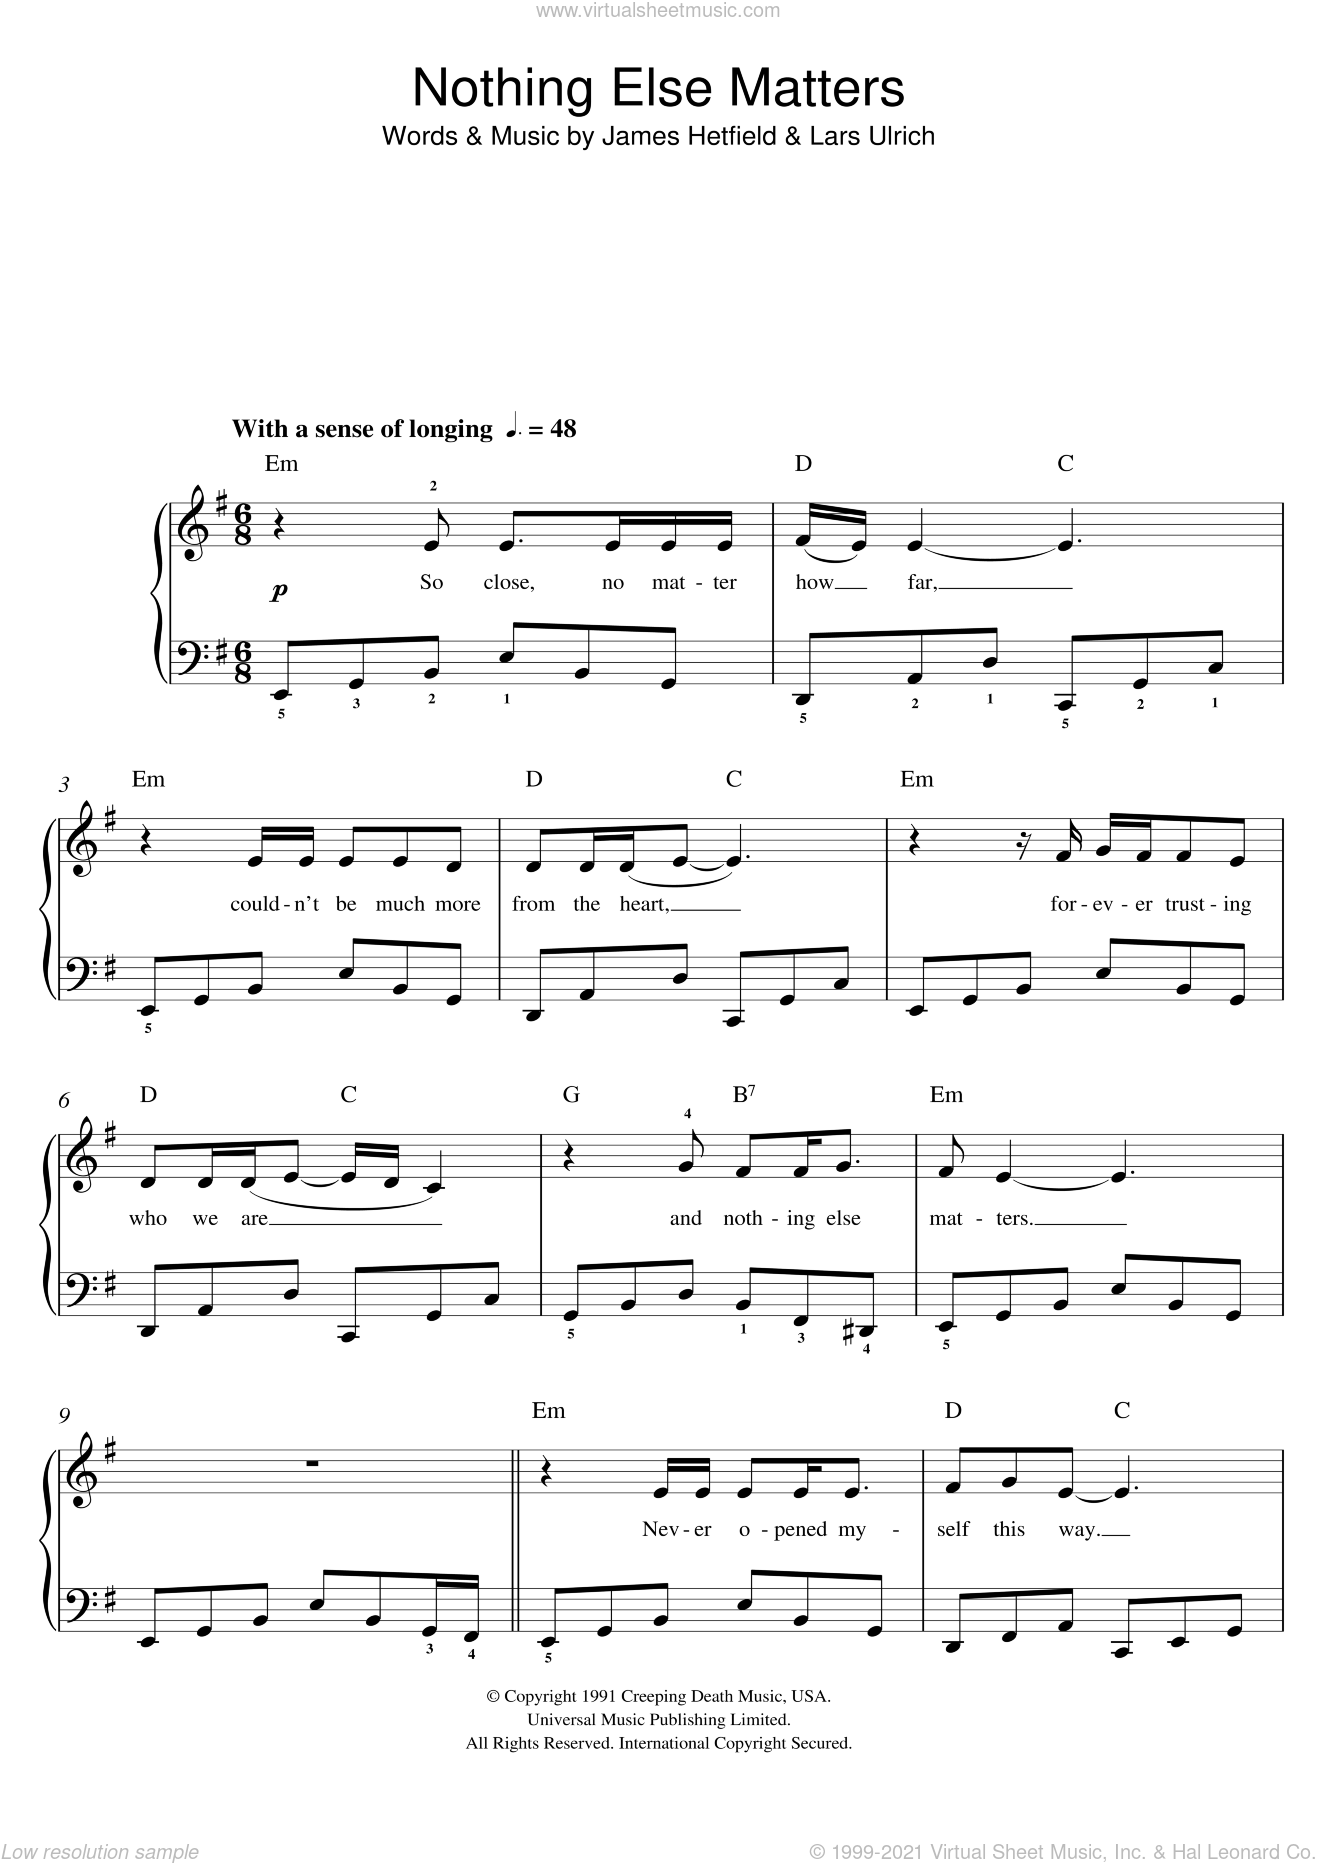 Metallica - Nothing Else Matters sheet music for piano solo (beginners)